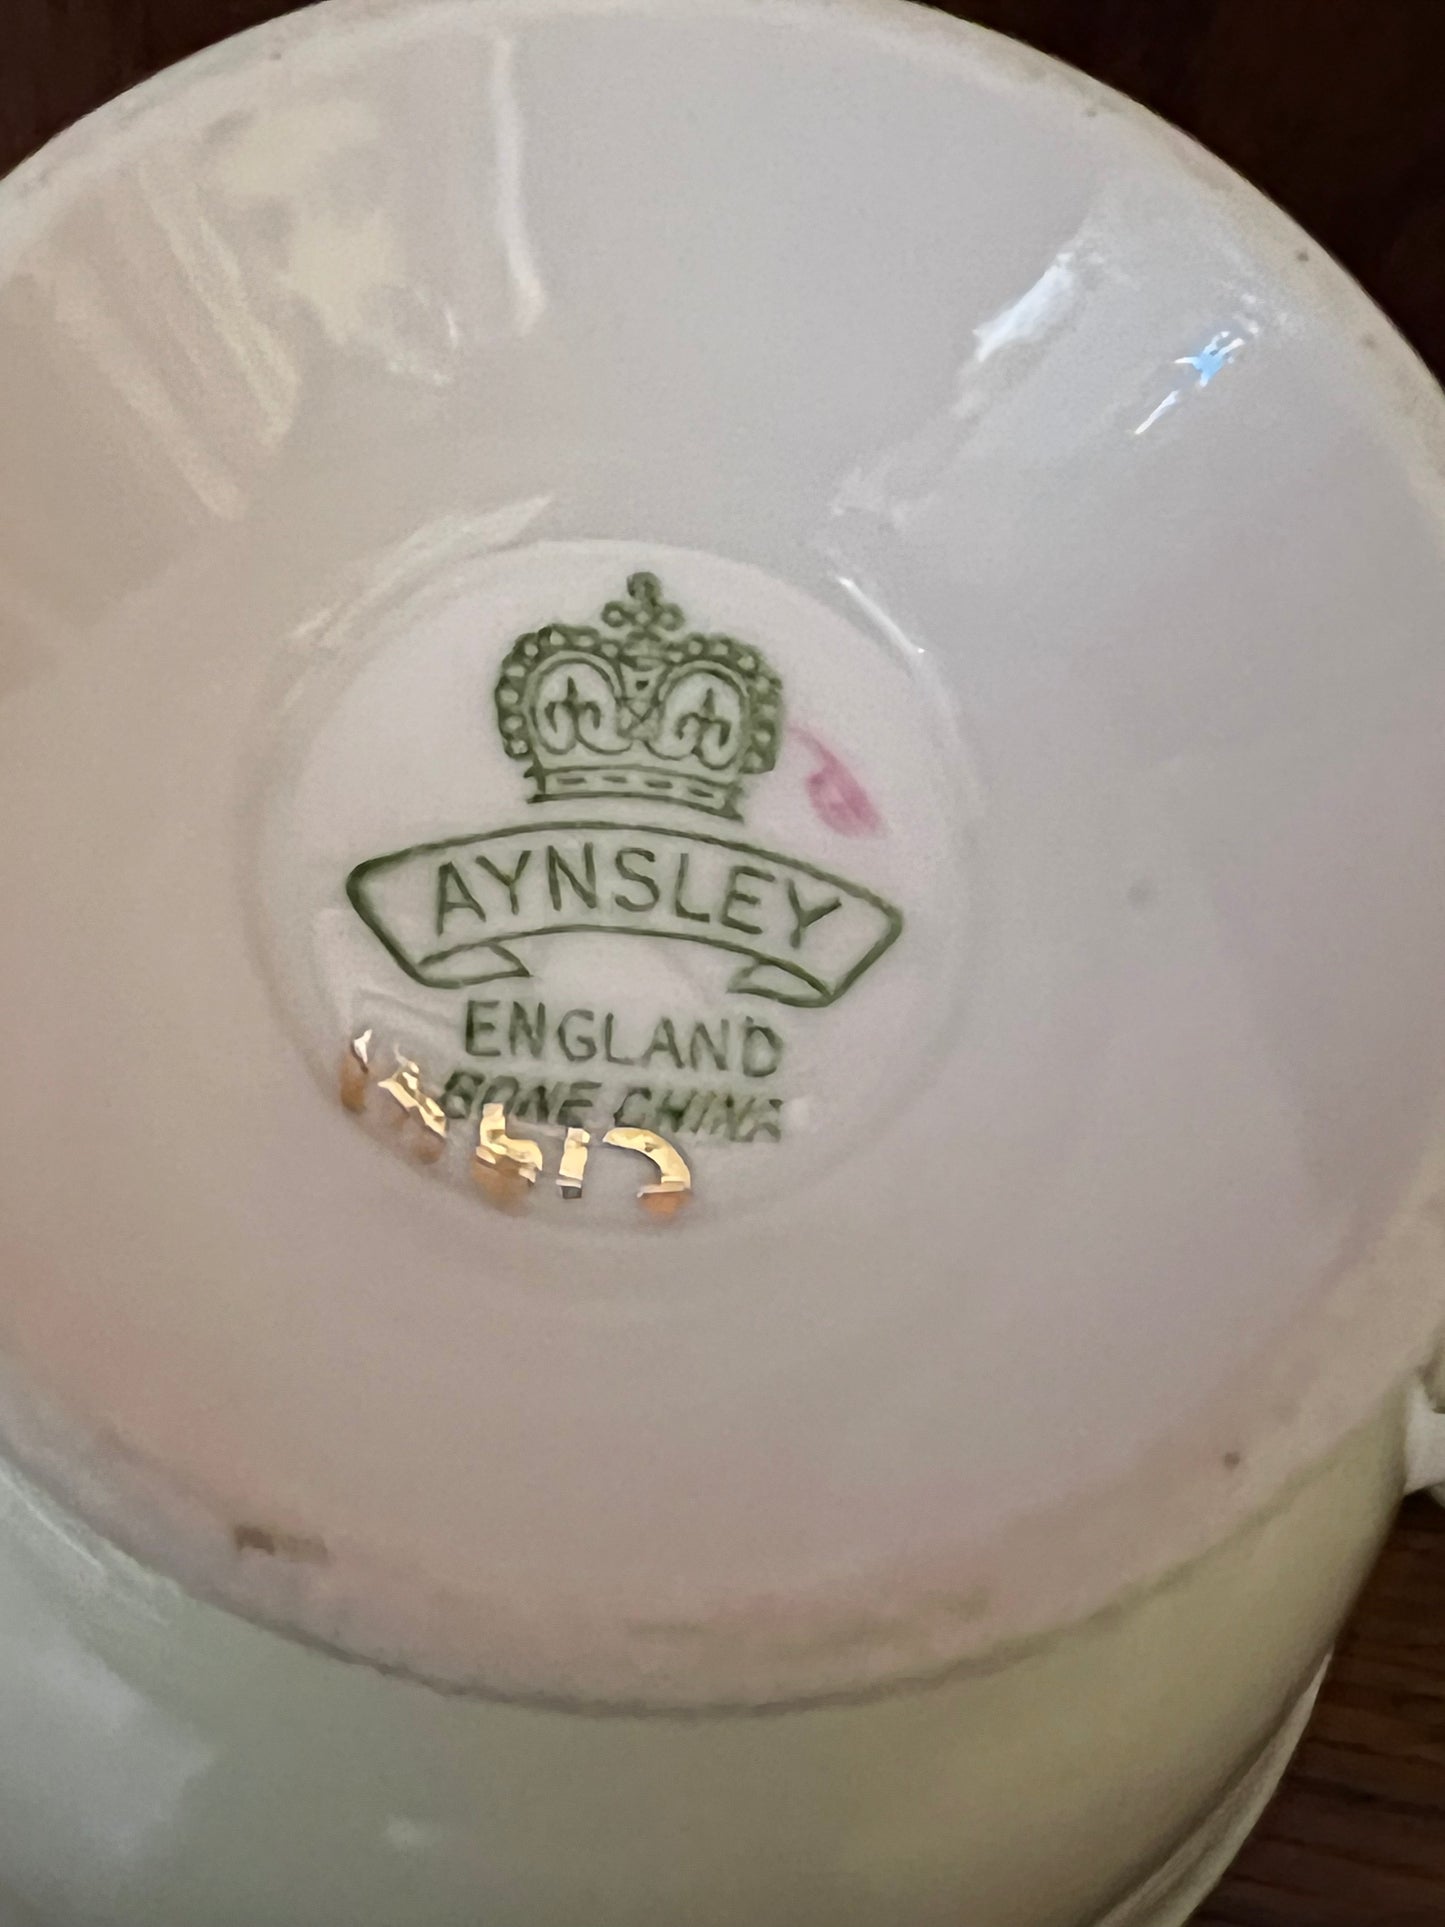 Vintage Aynsley Green Tea Cup Replacement